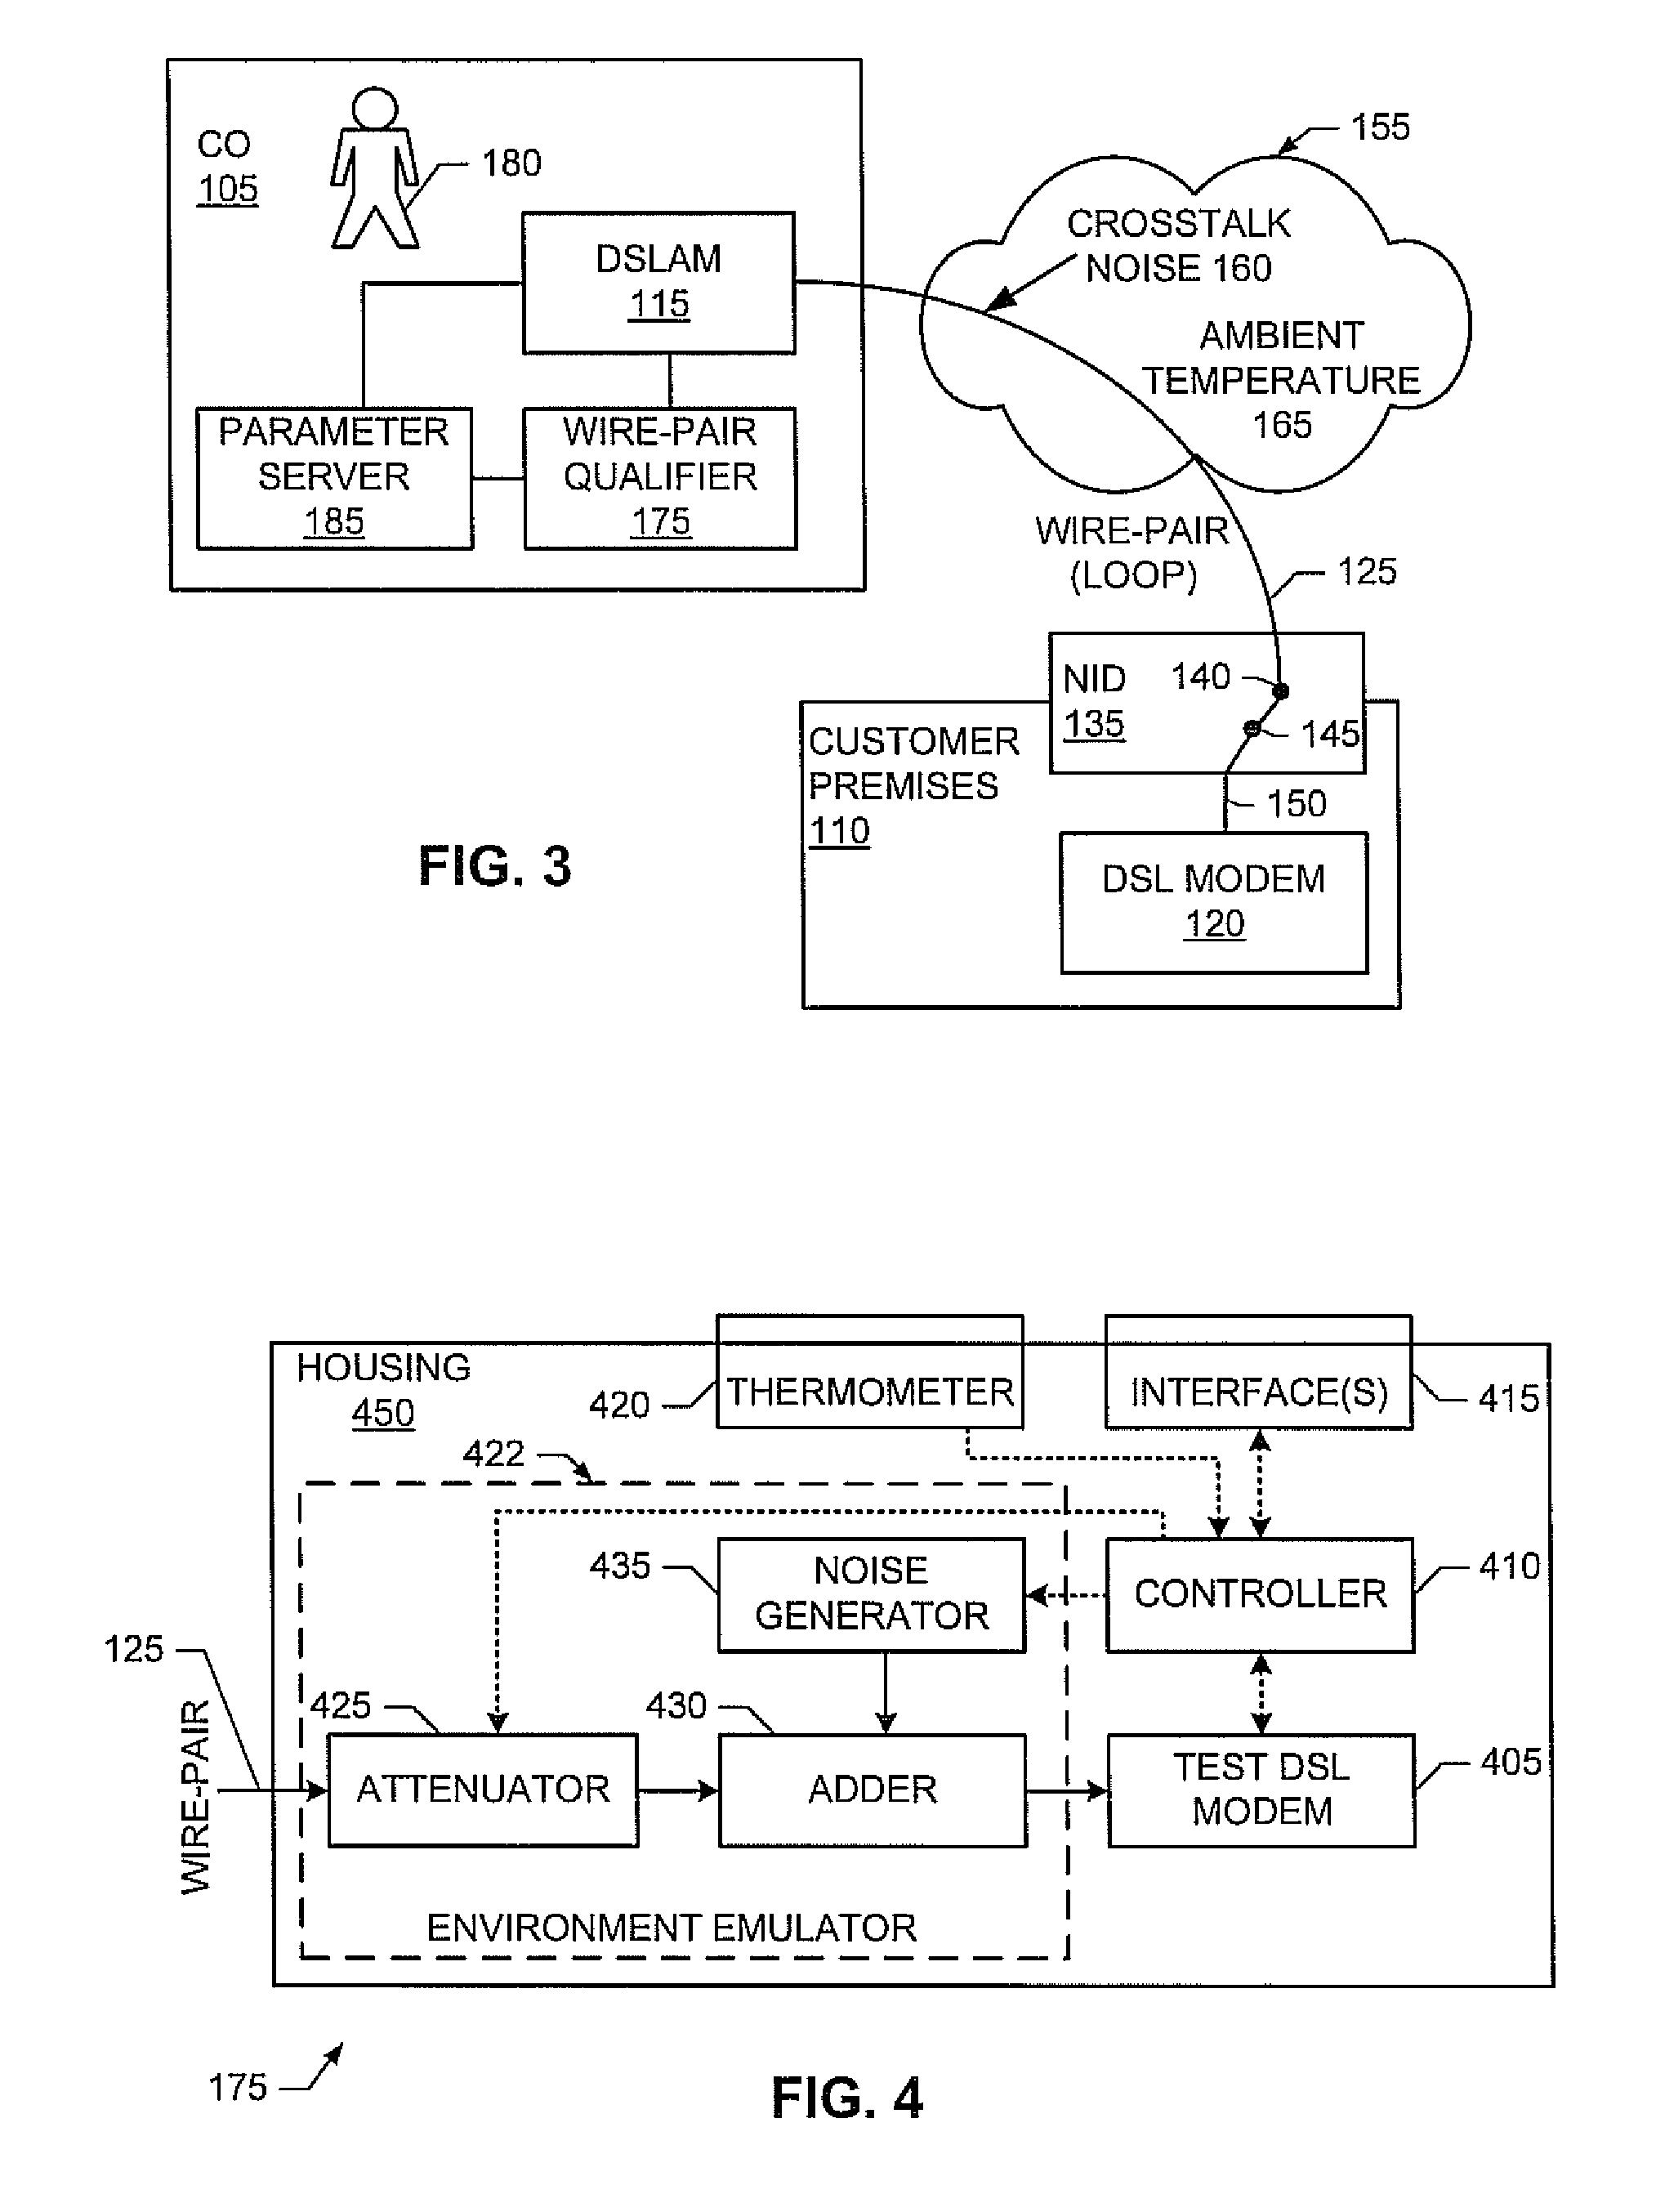 Methods and apparatus to qualify a wire-pair for a digital subscriber line (DSL) service